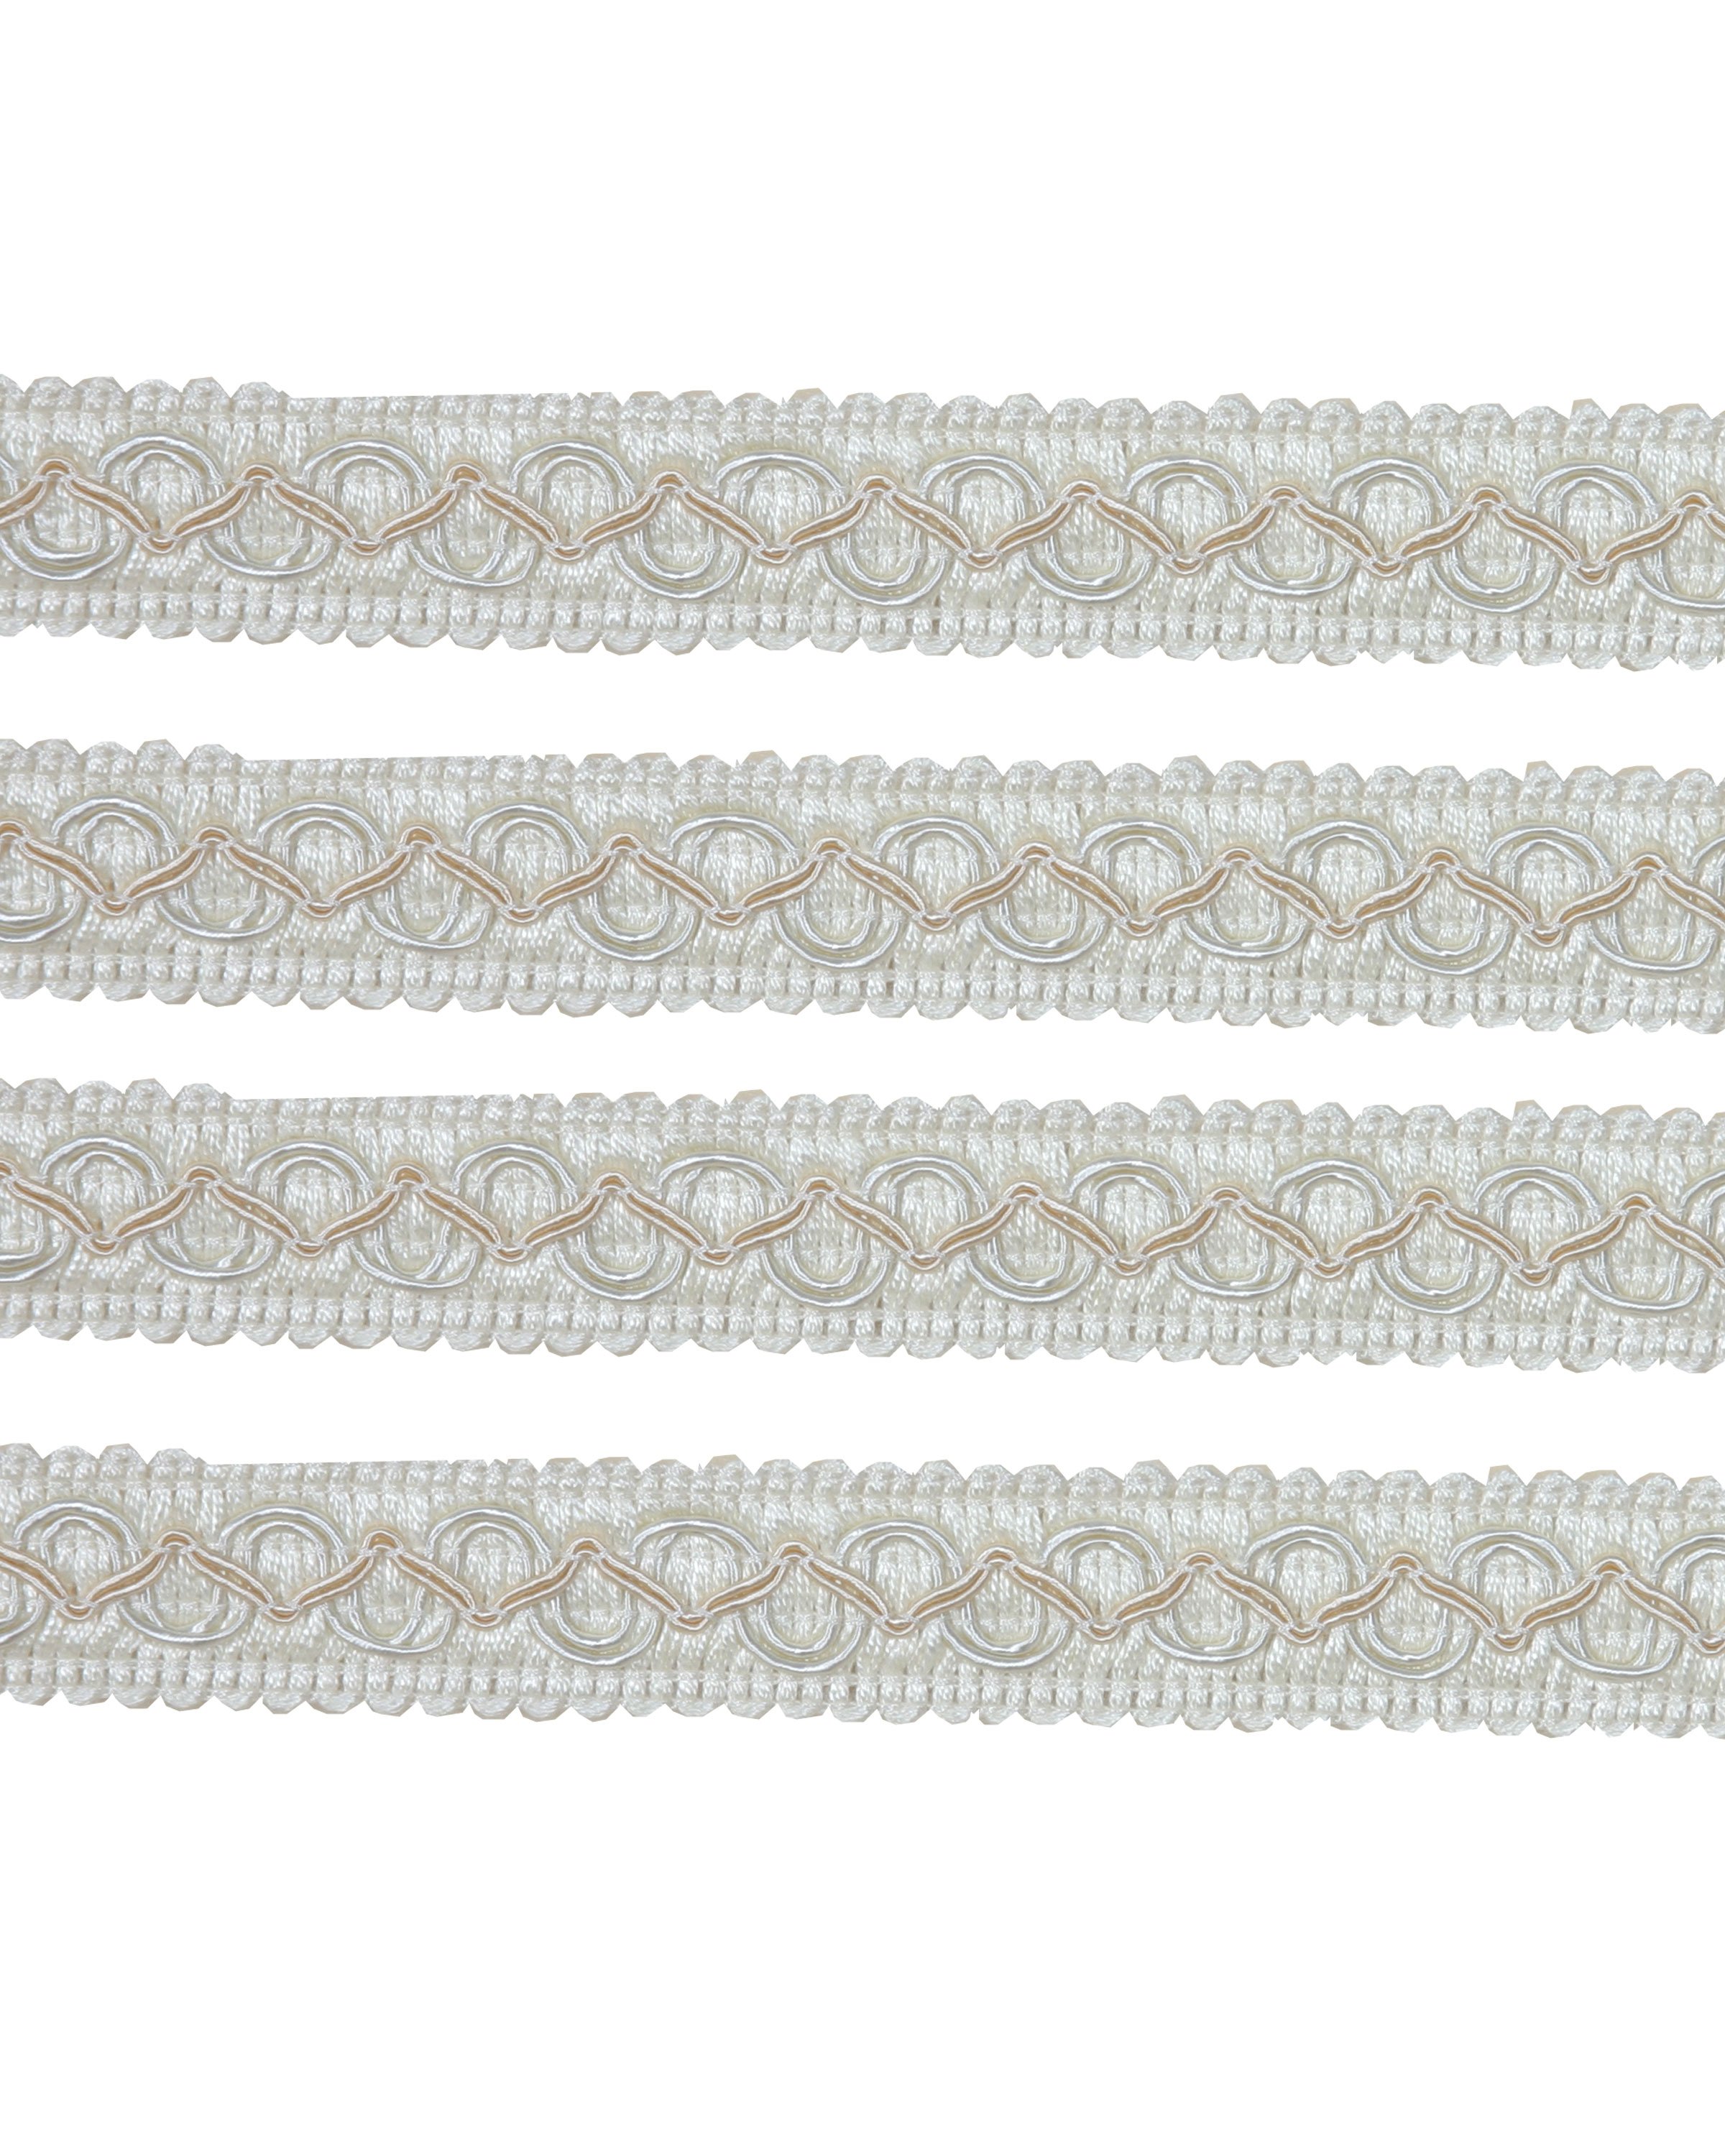 Fancy Braid - Cream 21mm Price is for 5 metres